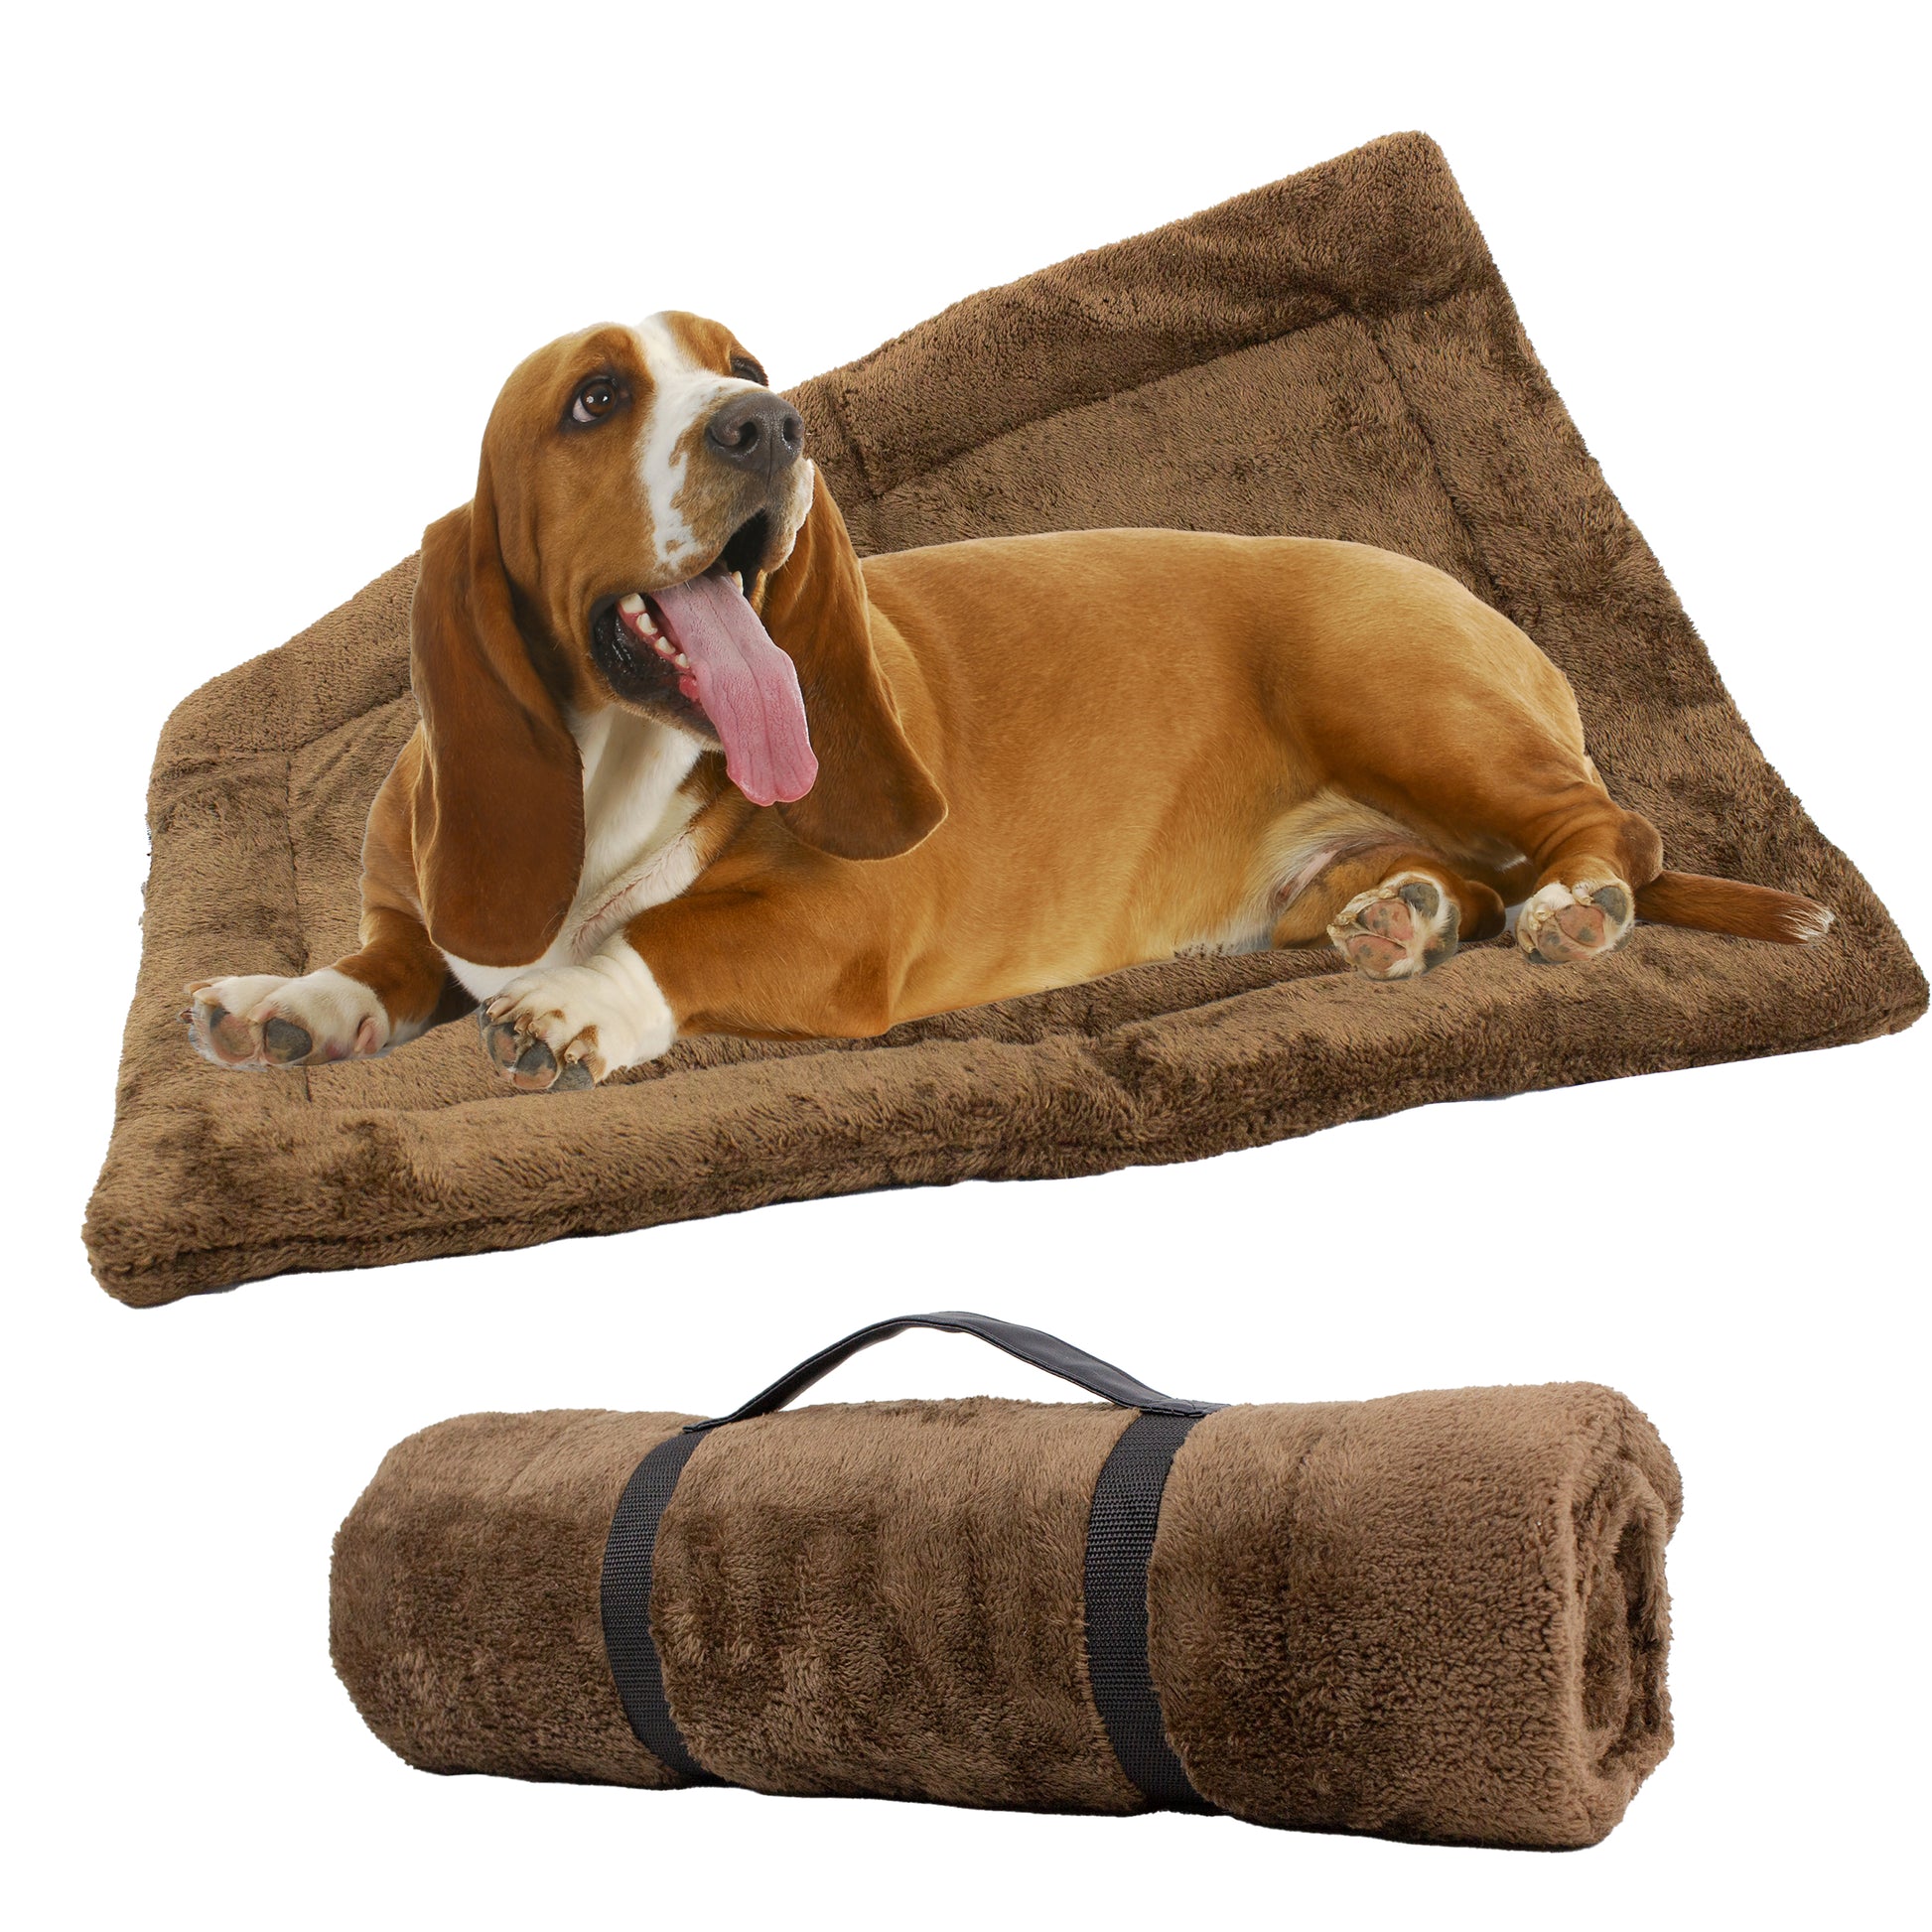 Self-Heating Thermal Crate Mats - Warming Kennel Pads for Dogs